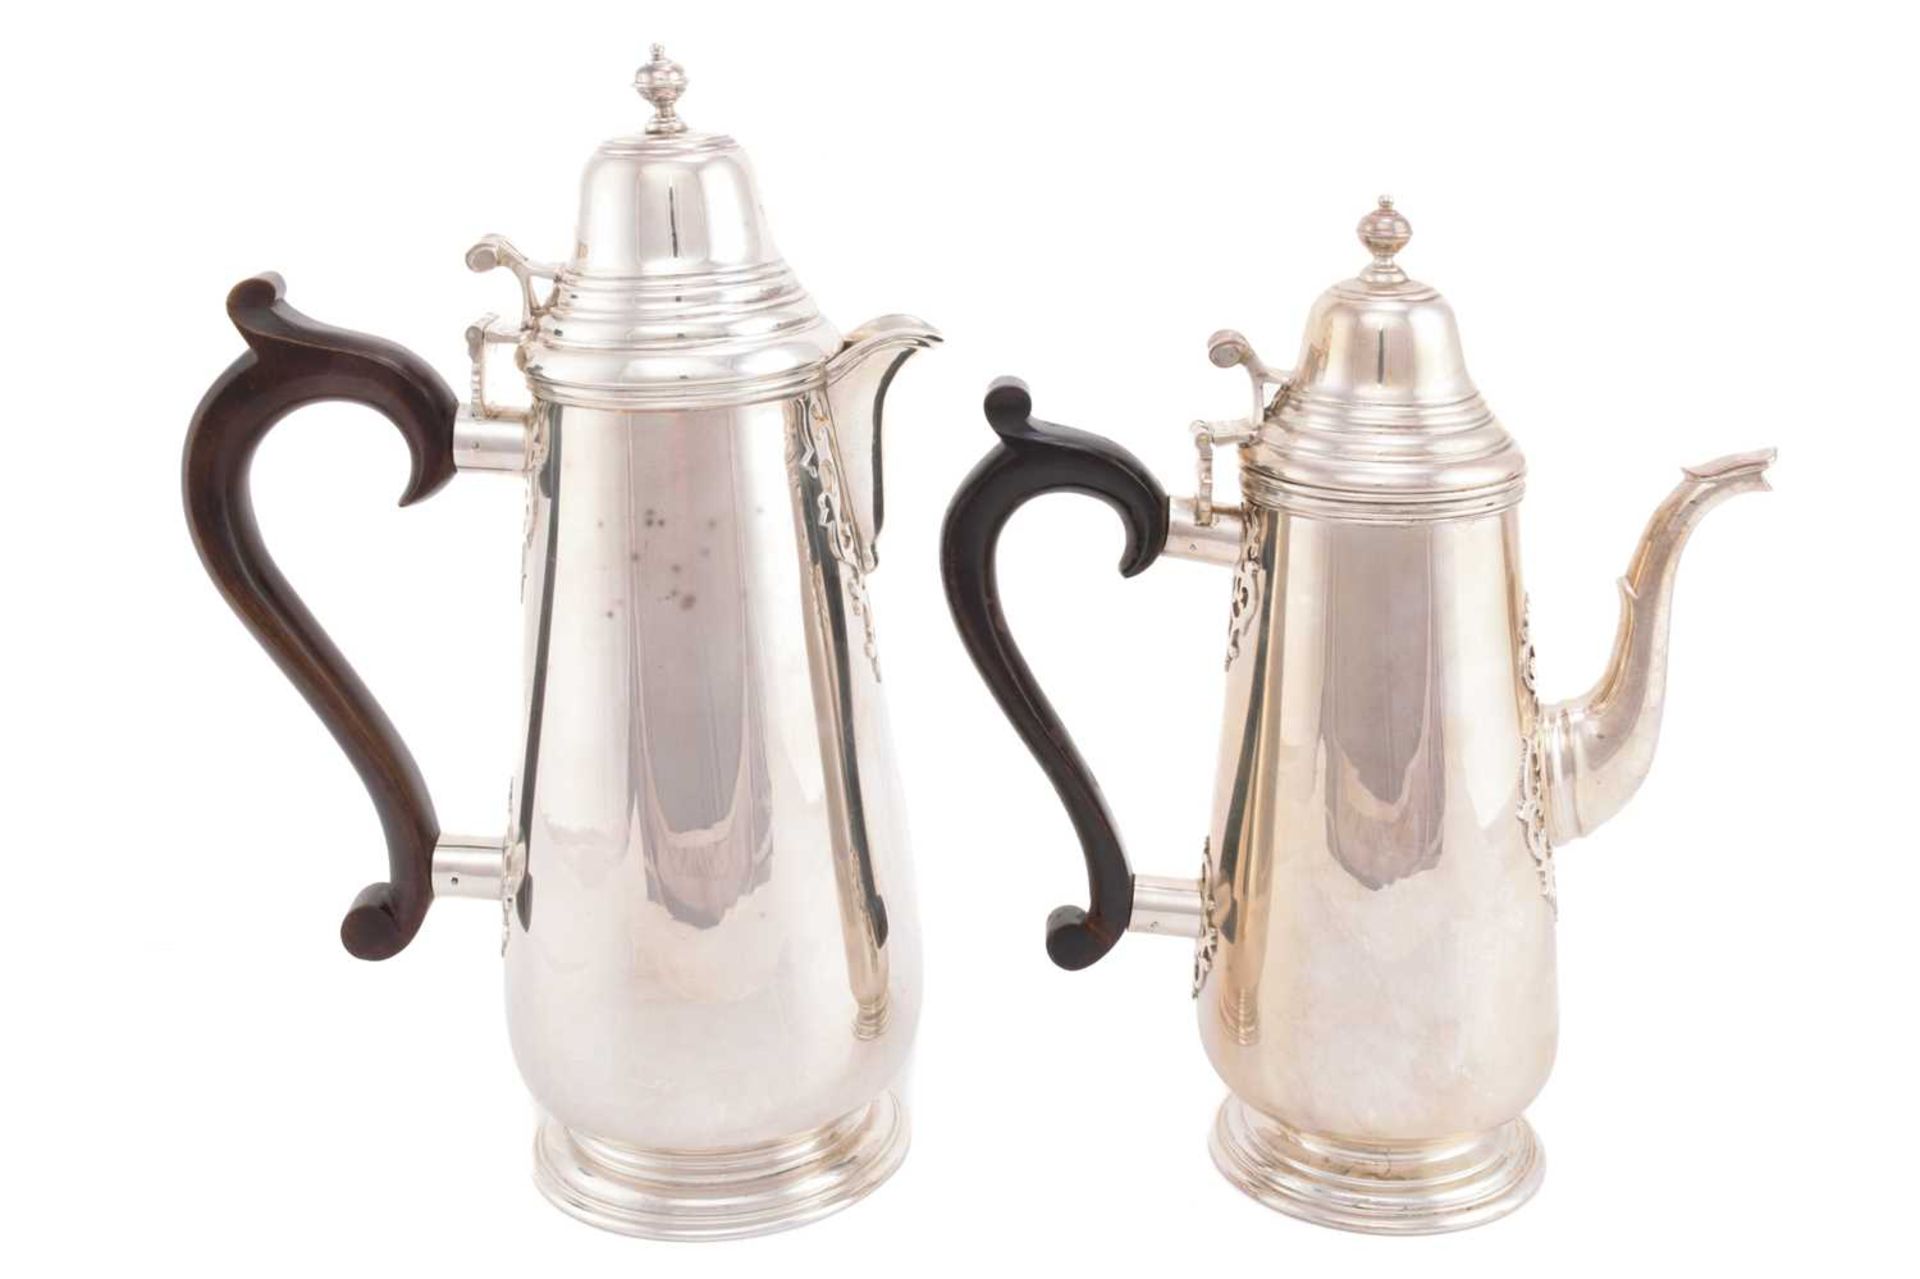 A silver hot water jug and coffee pot, London 1970 by A Haviland-Nye, both with a domed lid above